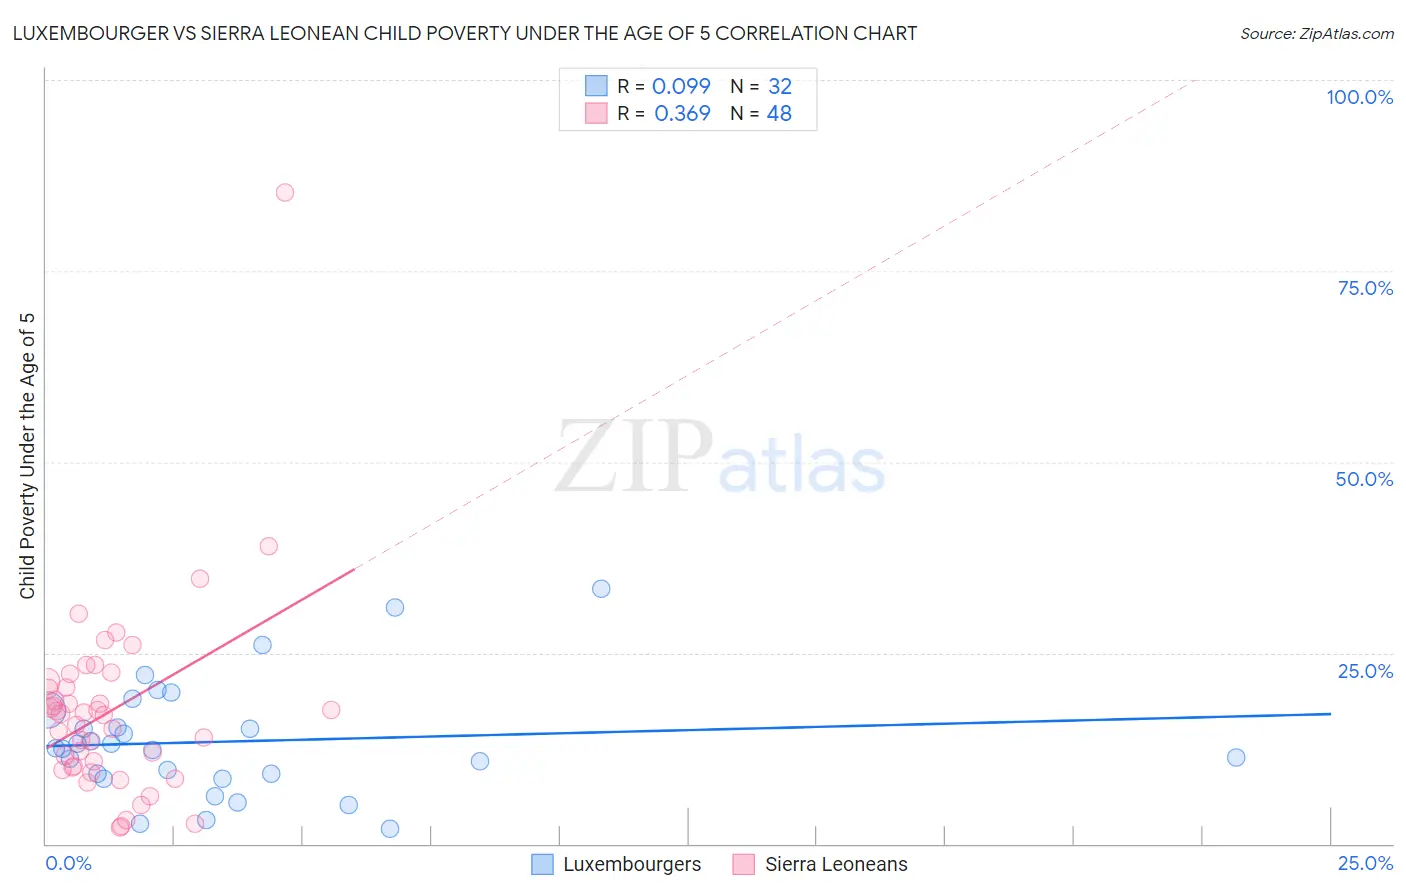 Luxembourger vs Sierra Leonean Child Poverty Under the Age of 5